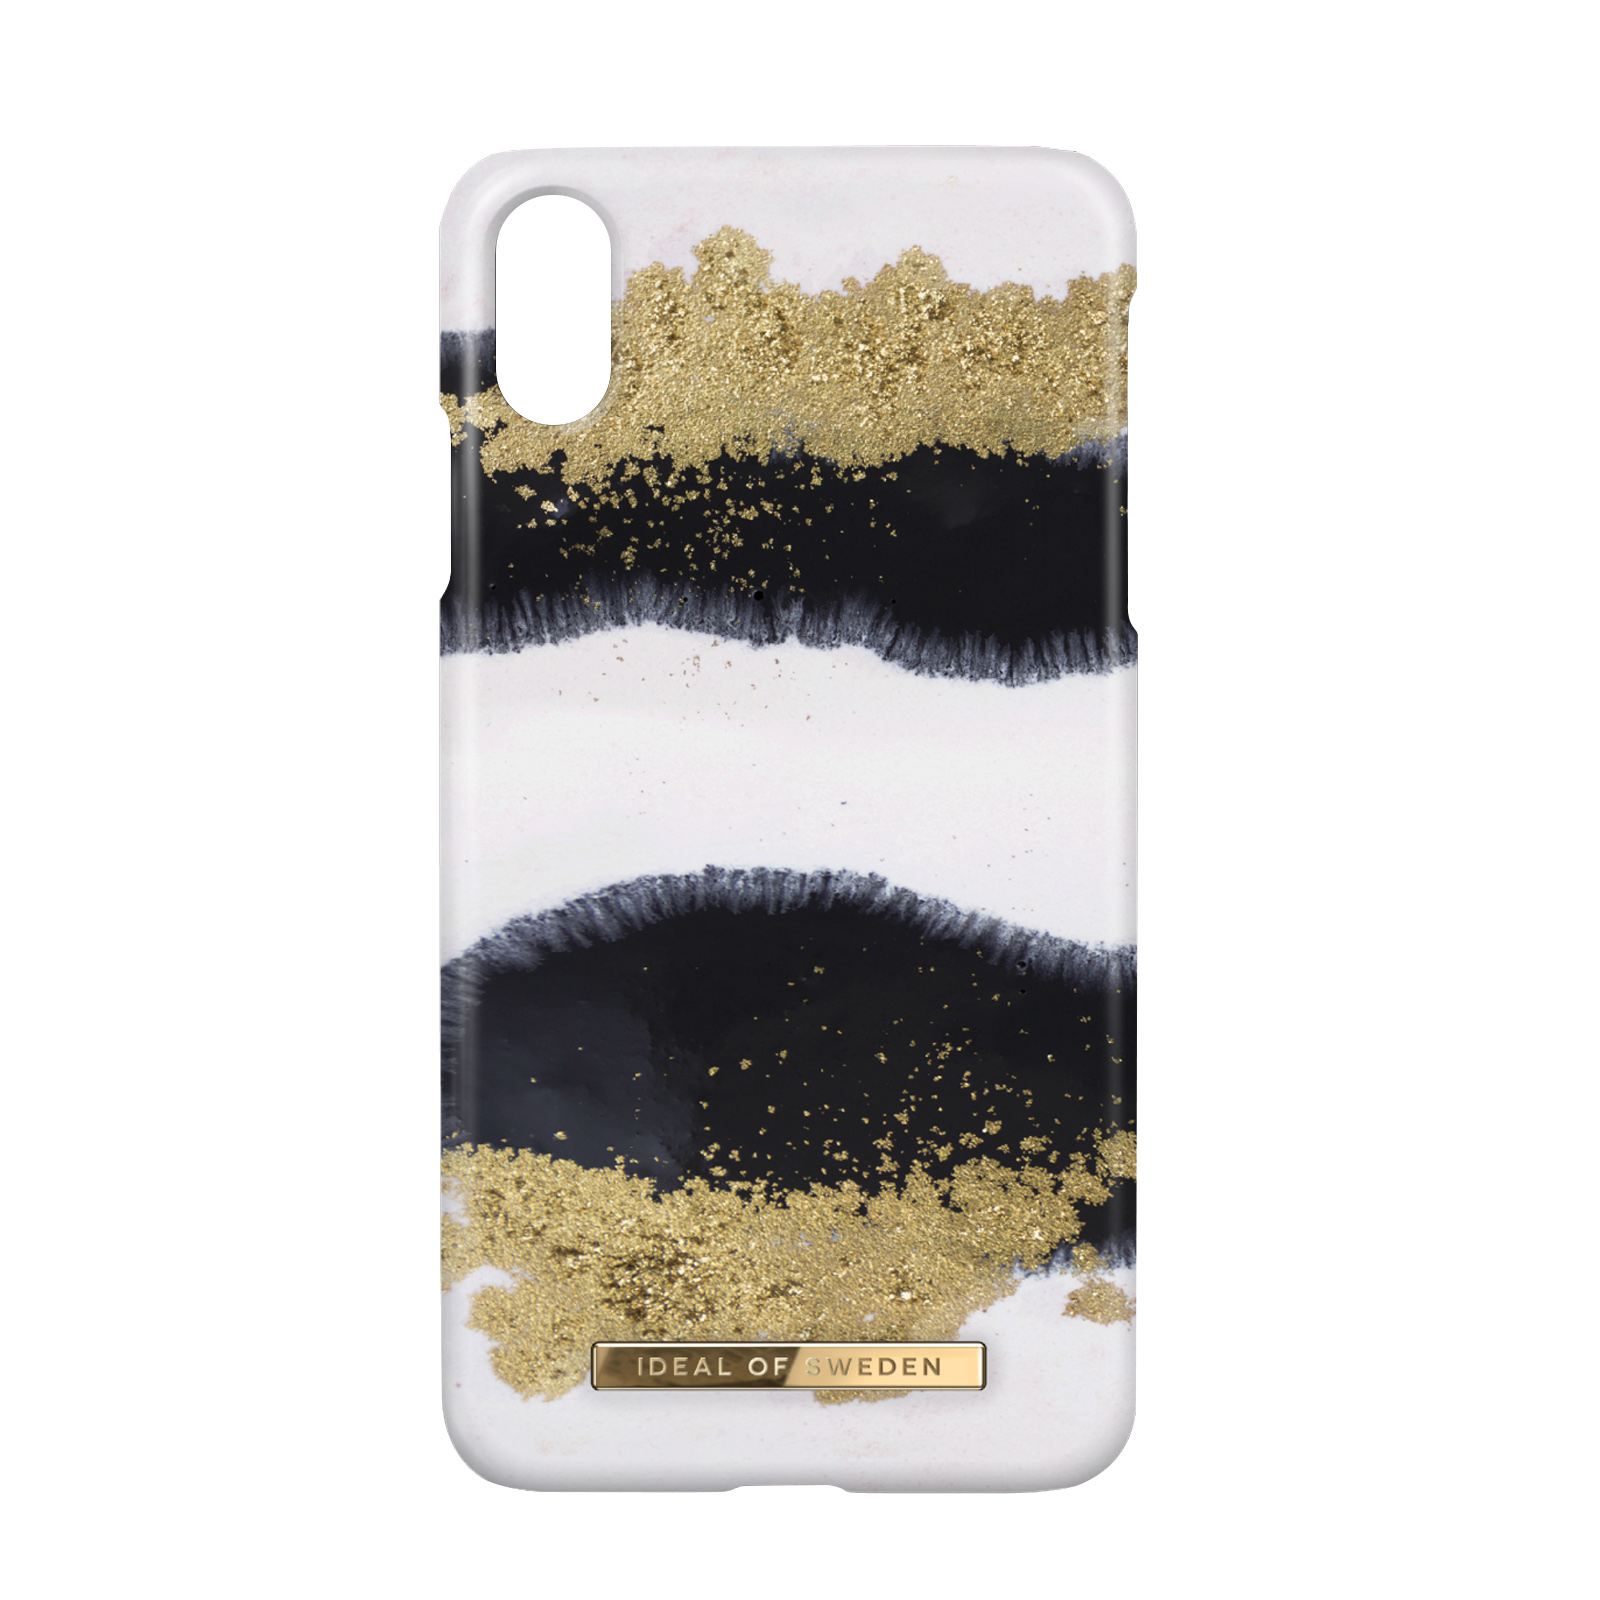 SWEDEN Gold OF Backcover, Gleaming iPhone Licorice Apple, IDEAL XR, Series,